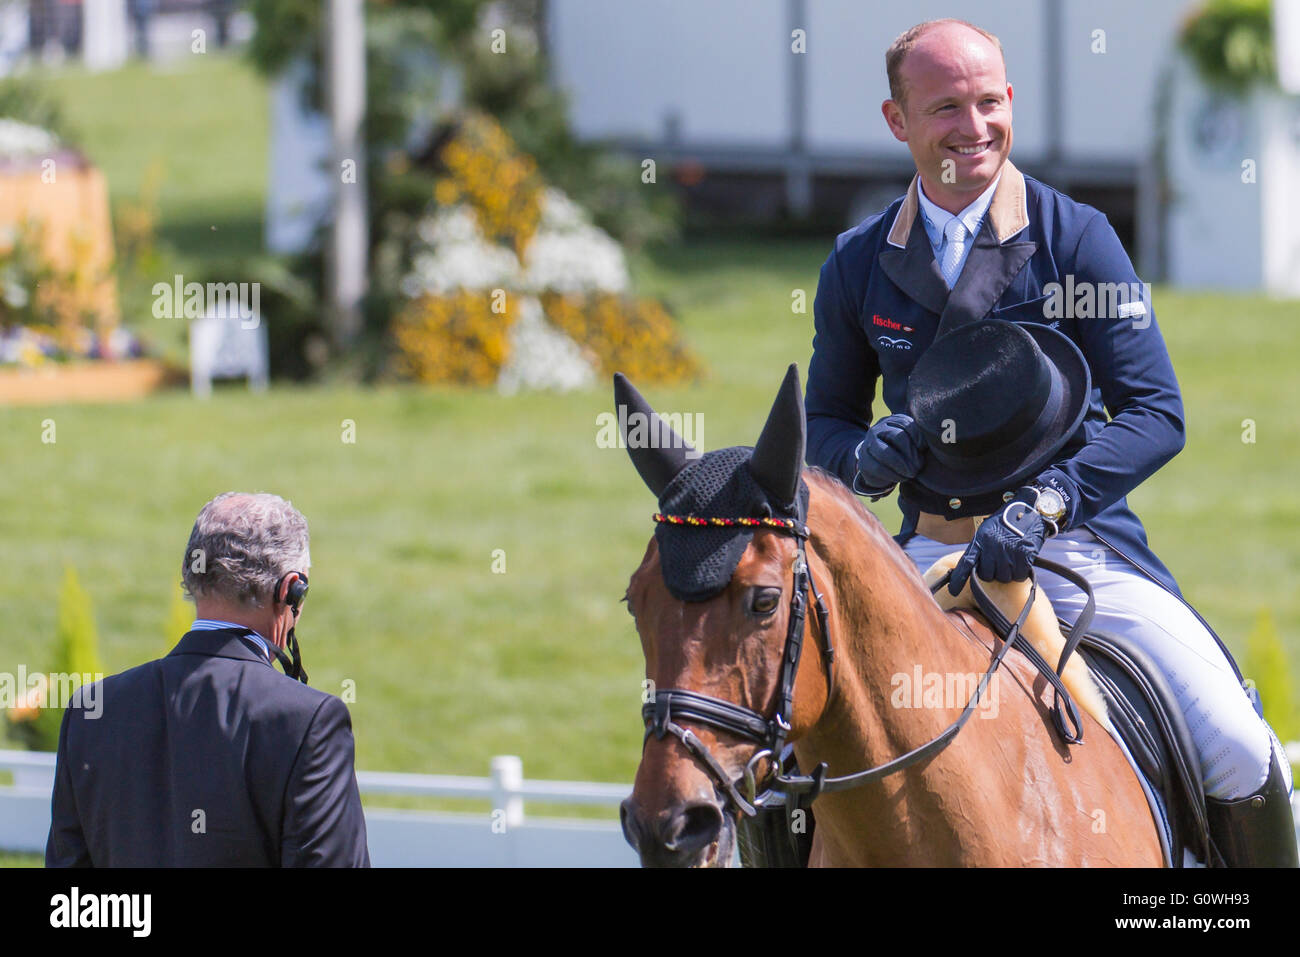 Badminton, South Gloucestershire, UK. 5th May 2016. Michael Jung of Germany and his horse Michael Jung La Biosthetique - Sam FBW take part in the dressage phase at the Mitsubishi Motors Badminton Horse Trials 2016. Dressage is an advanced form of riding that tests the horse and rider as they perform difficult manoeuvres based around a horse's natural movements. Credit: Trevor Holt / Alamy Live News Stock Photo